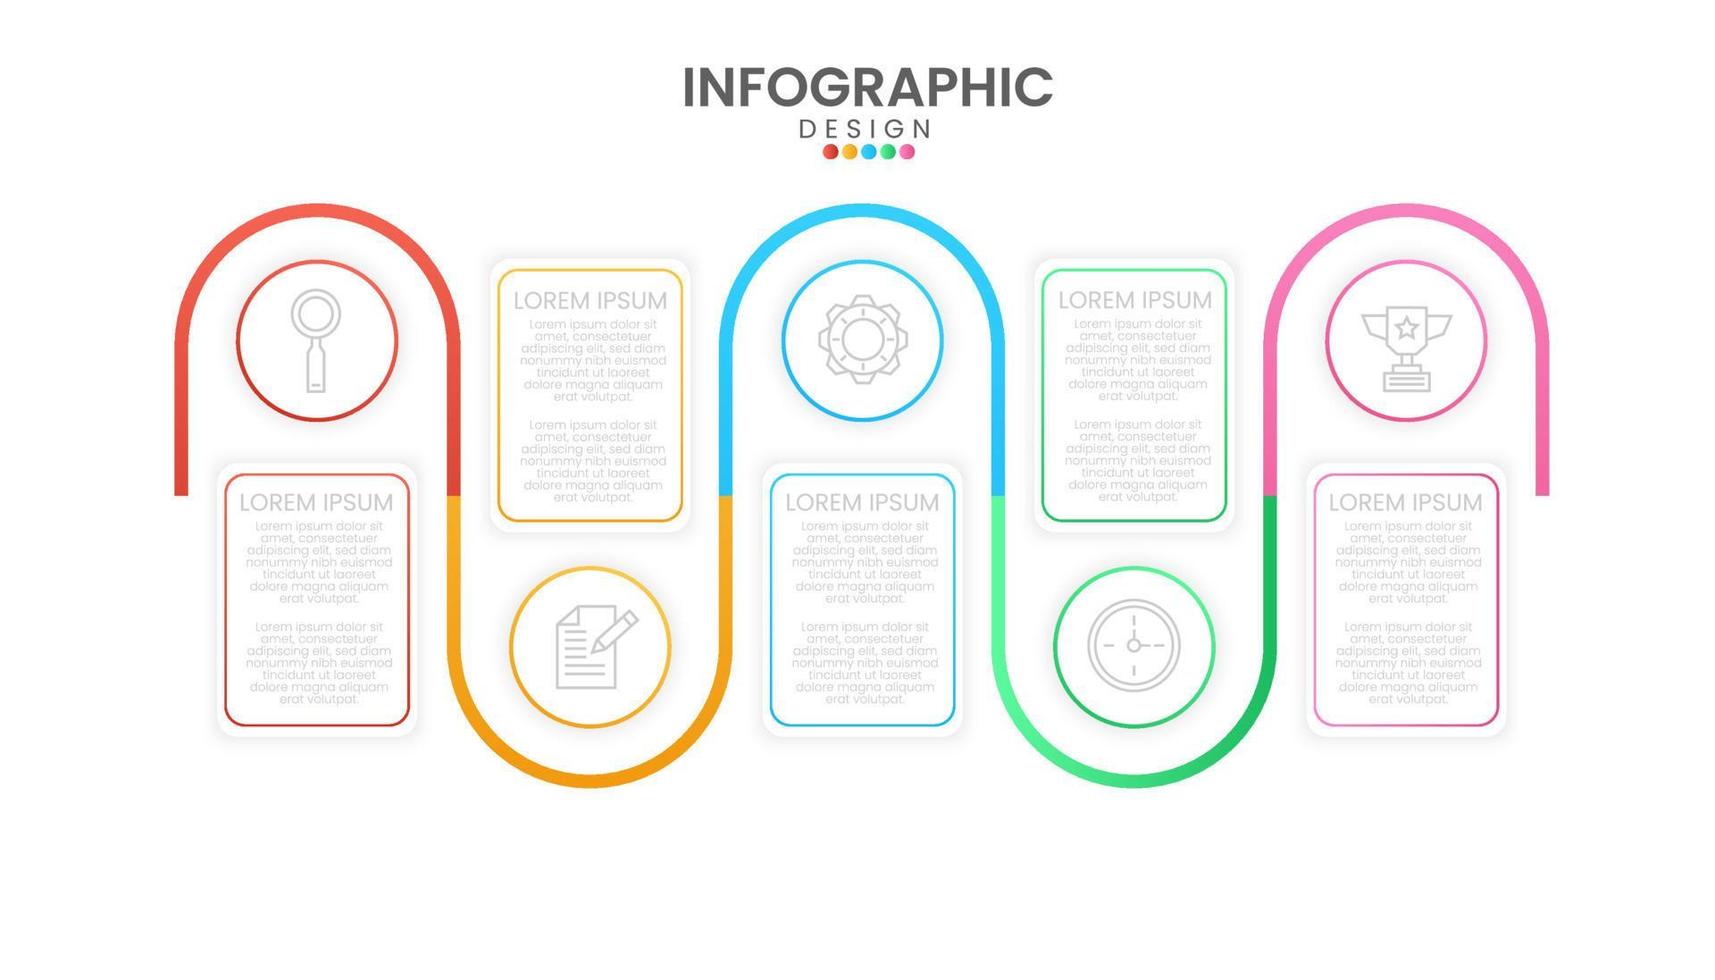 Infographic design template. Road map timeline concept with 5 steps. Vector illustration